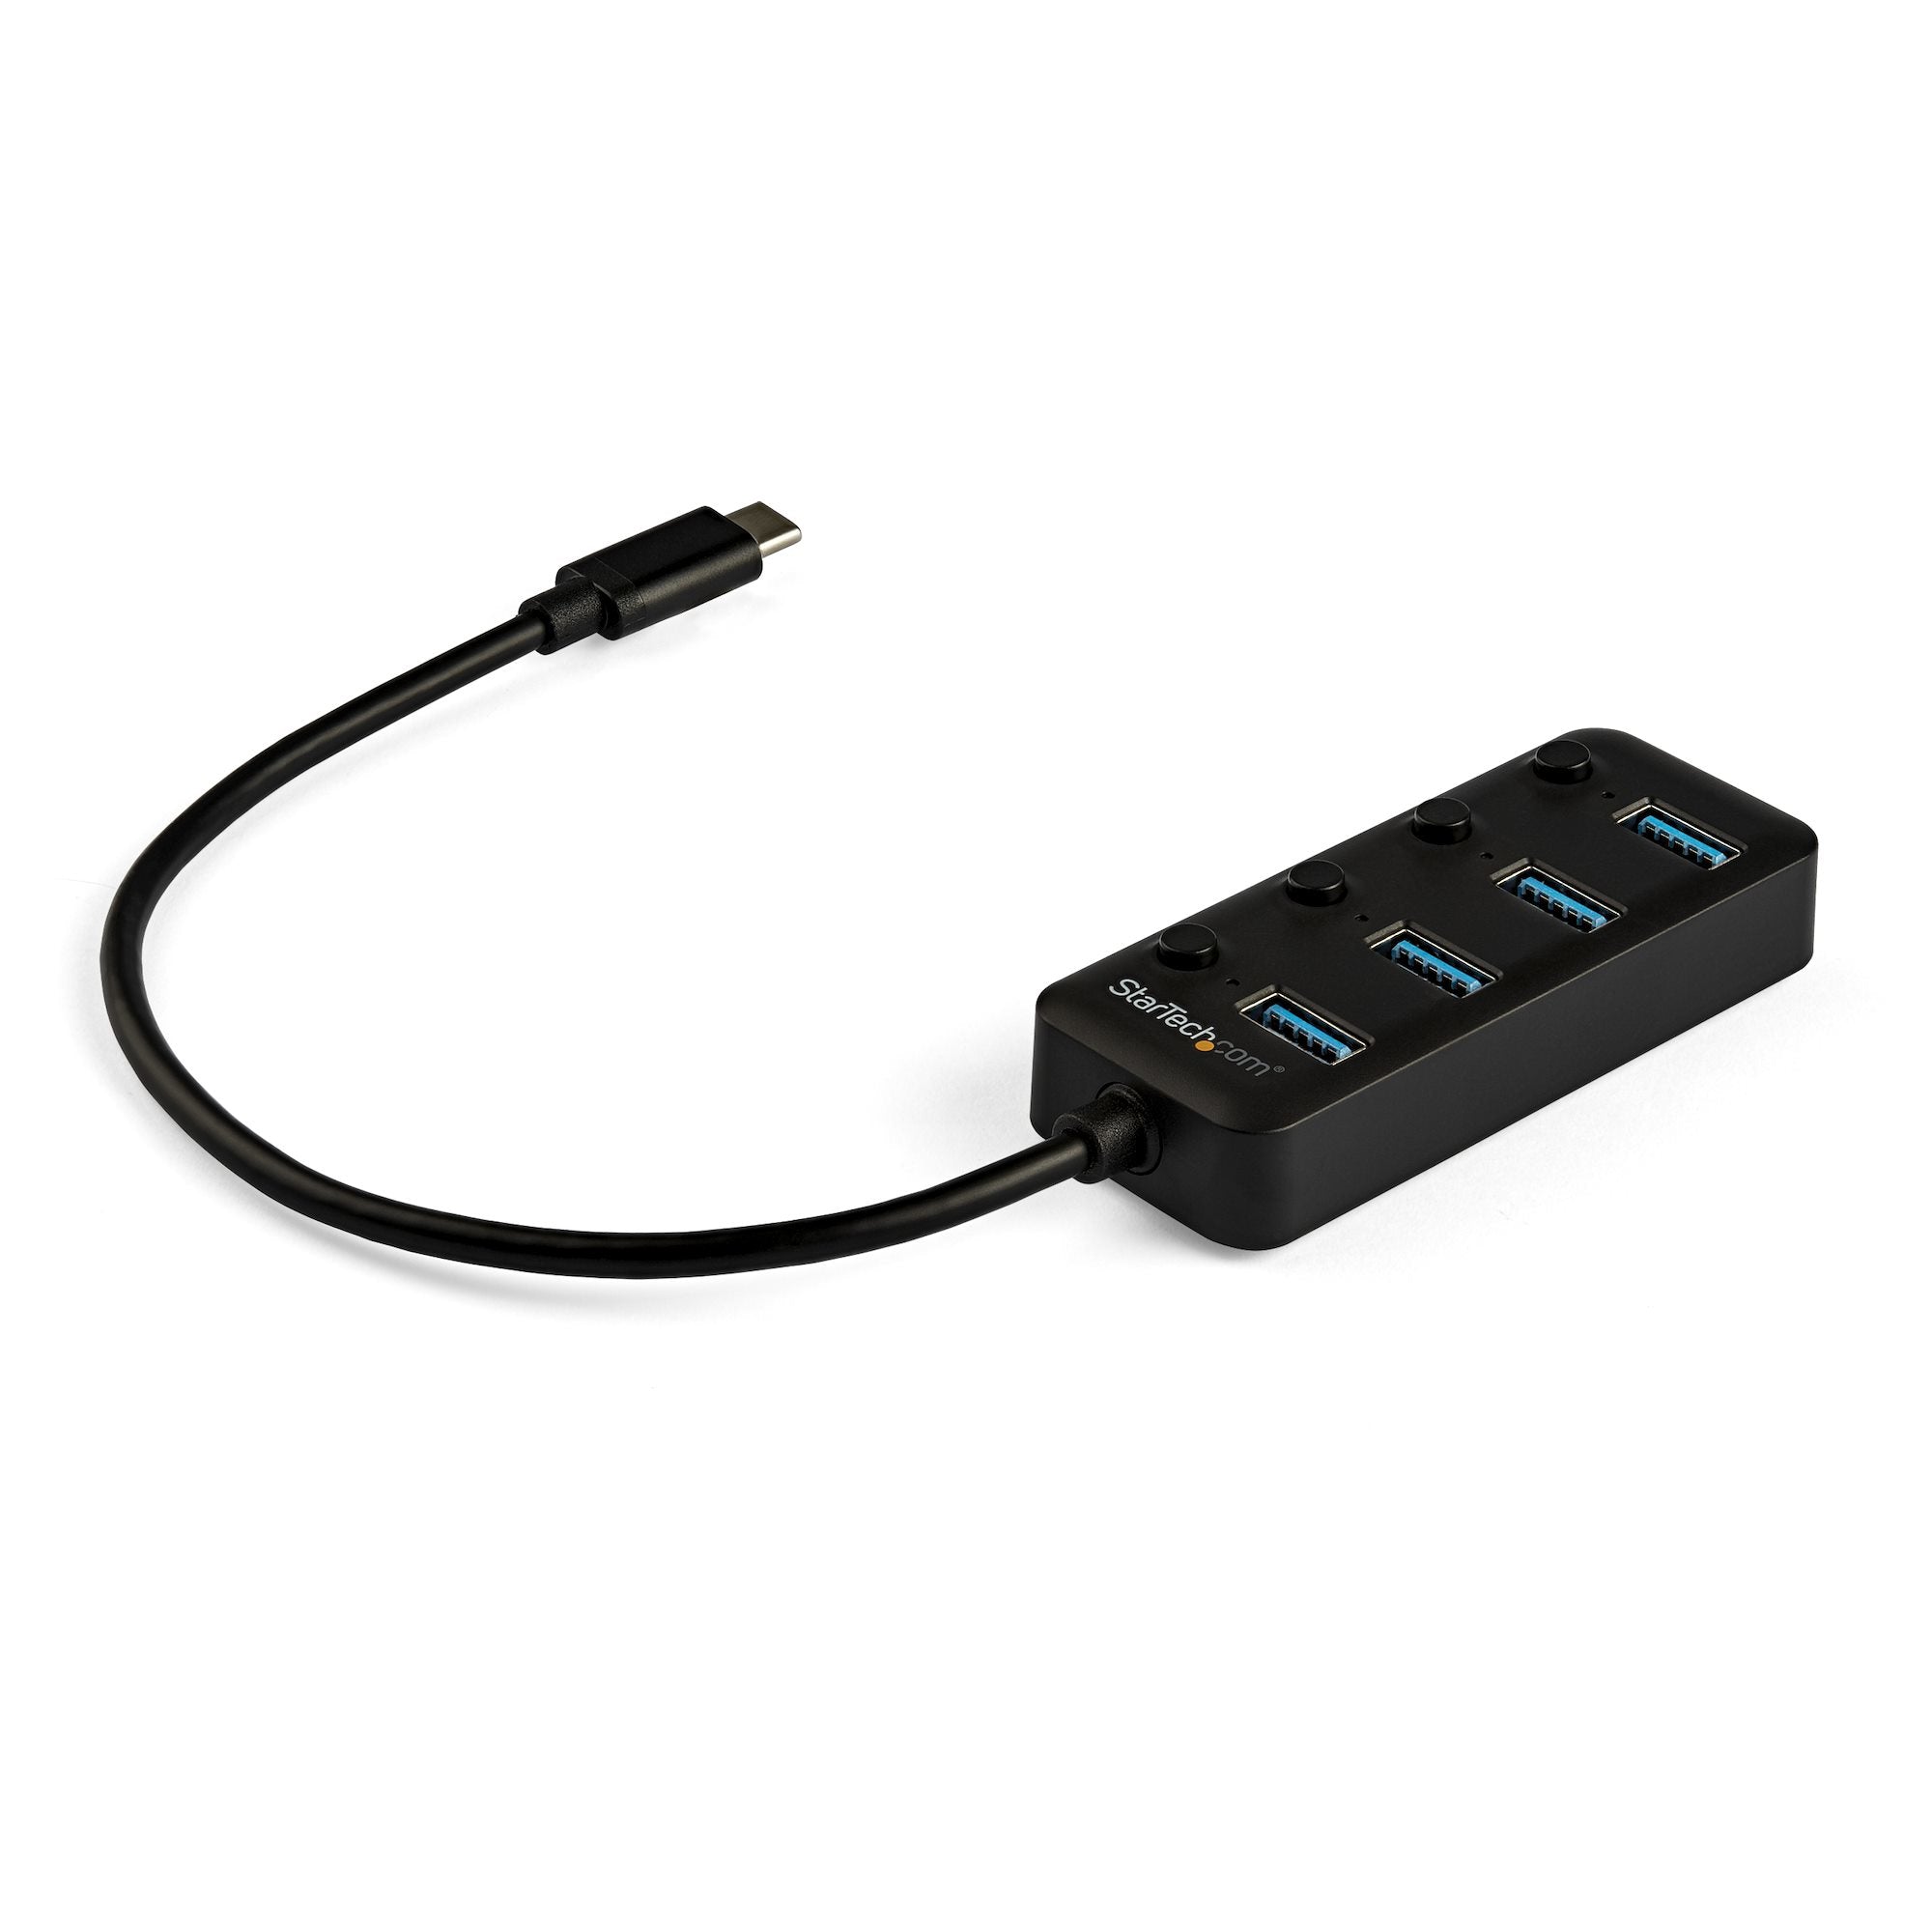 StarTech.com 4 Port USB C Hub - USB-C to 4x USB 3.0 Type-A Ports with Individual On/Off Port Switches - SuperSpeed 5Gbps USB 3.1/3.2 Gen 1 - USB Bus Powered - Portable - 25cm Attached Cable~4 Port USB C Hub - USB-C to 4x USB 3.0 Type-A Ports with Individu